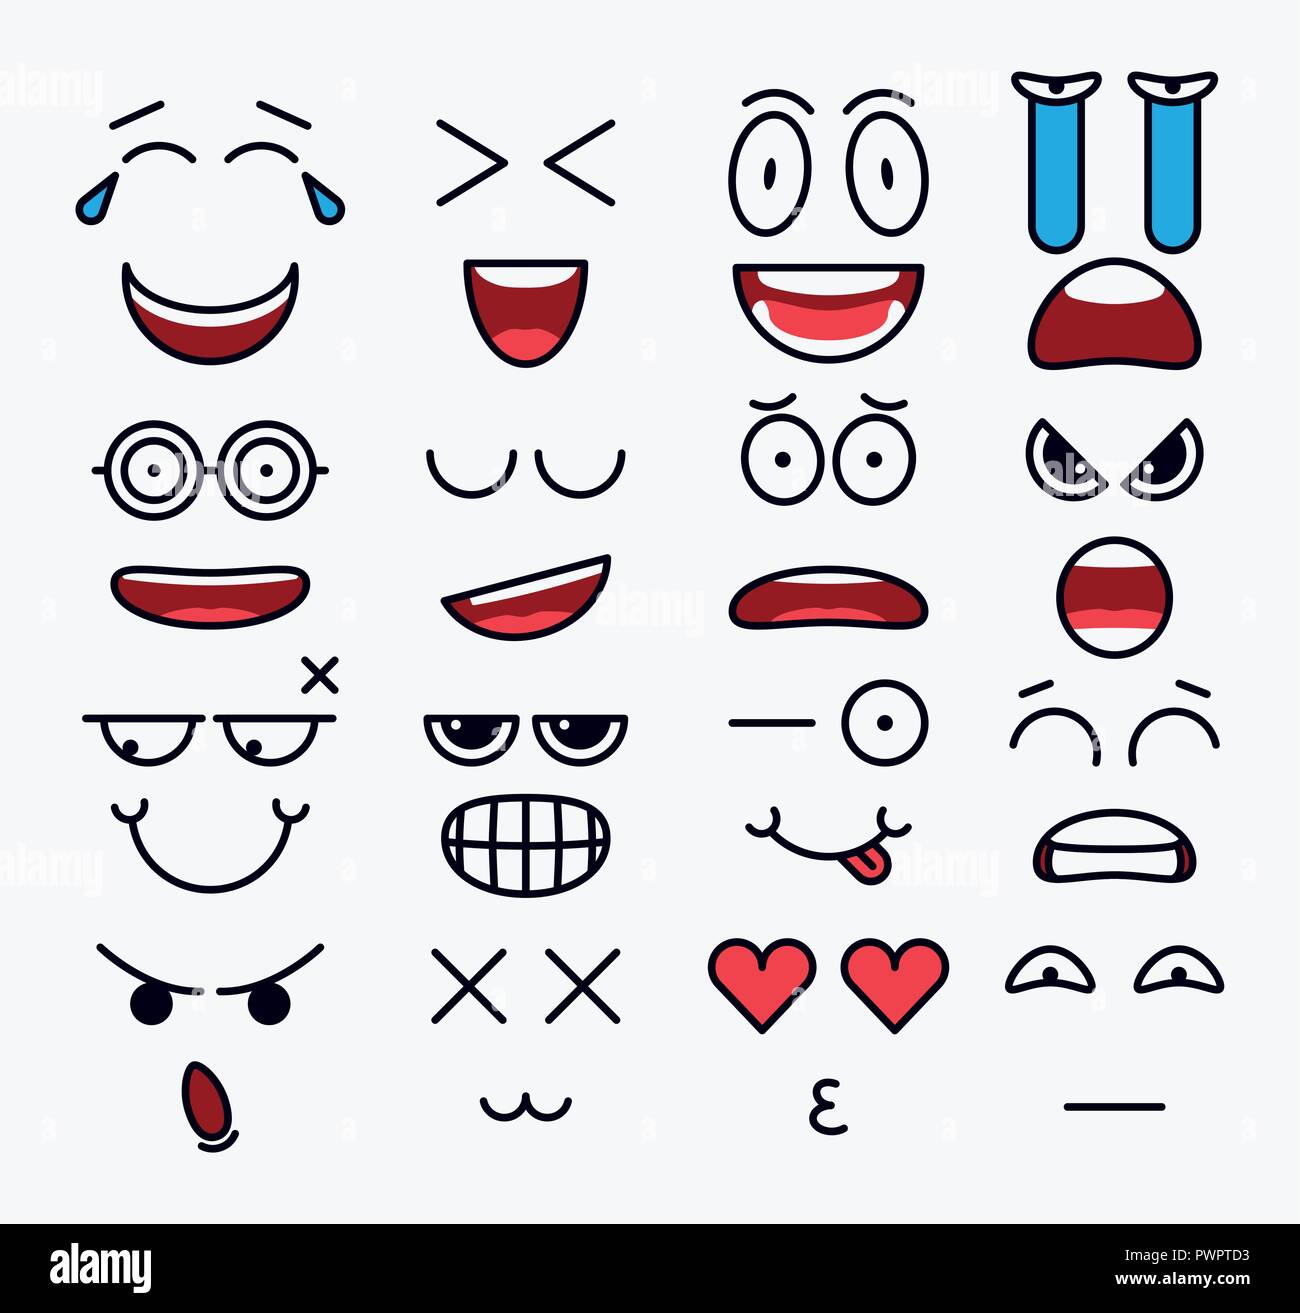 Smile constructor, Different vector elements for emotion design template for your design Stock Vector